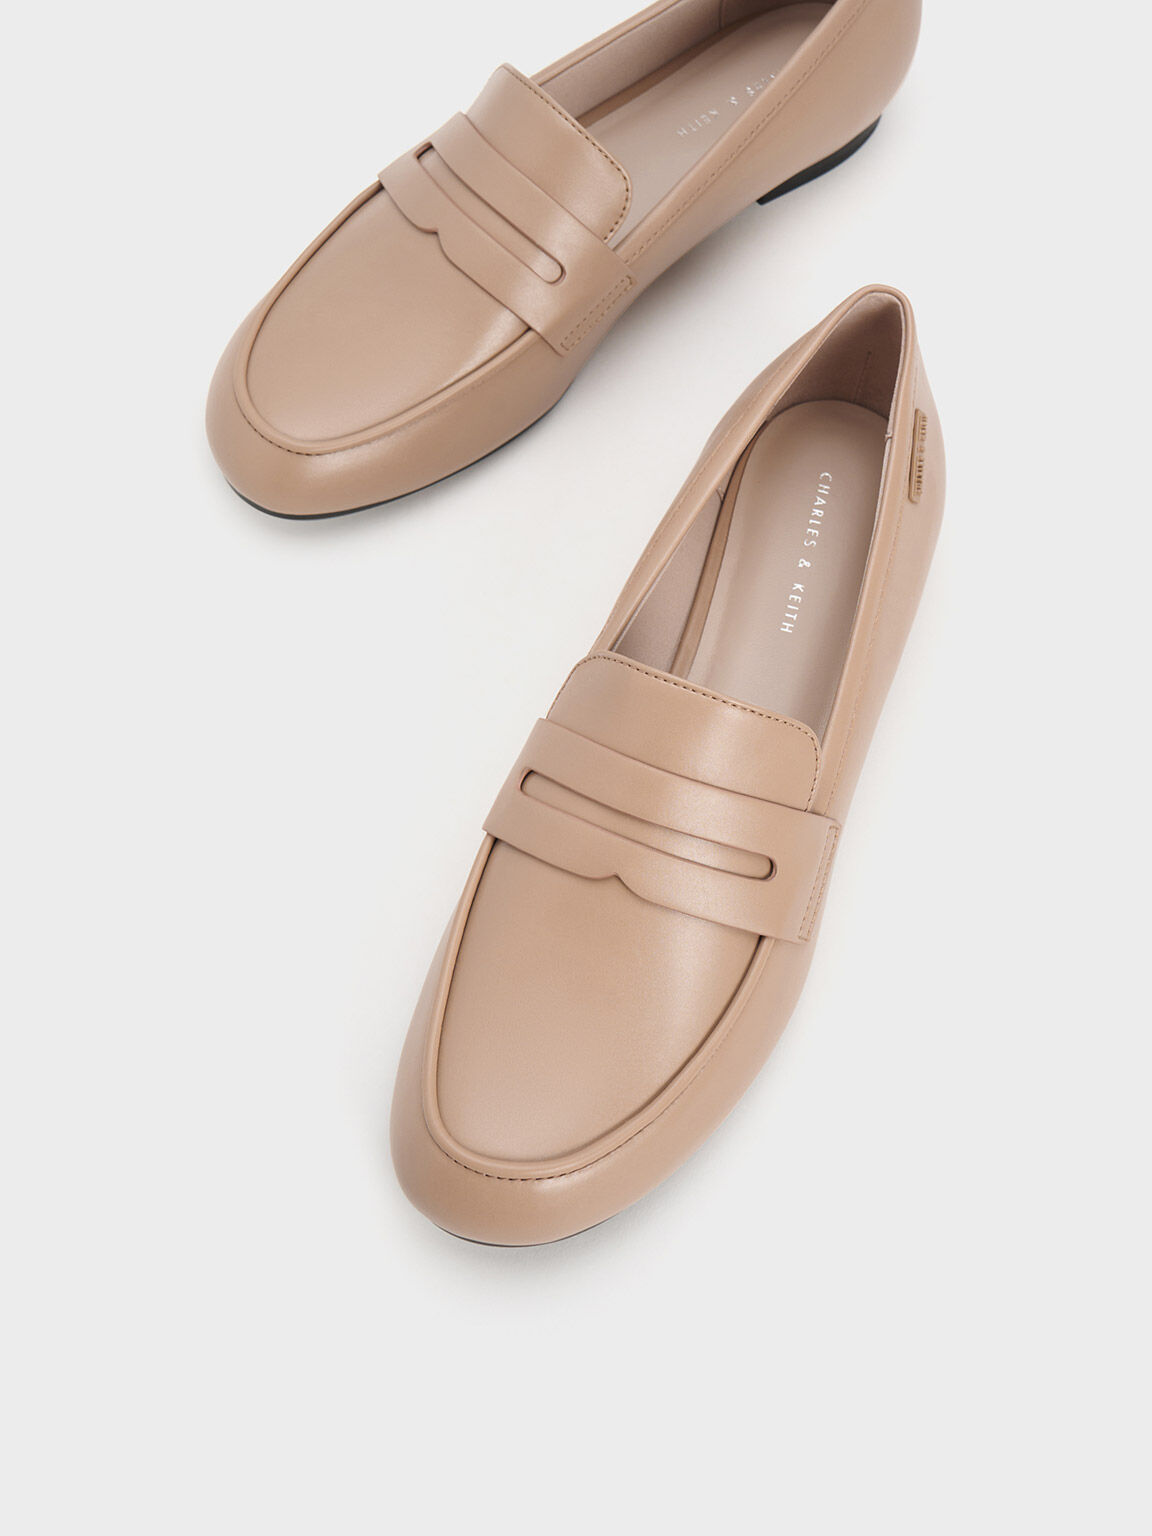 Cut-Out Almond Toe Penny Loafers, Nude, hi-res